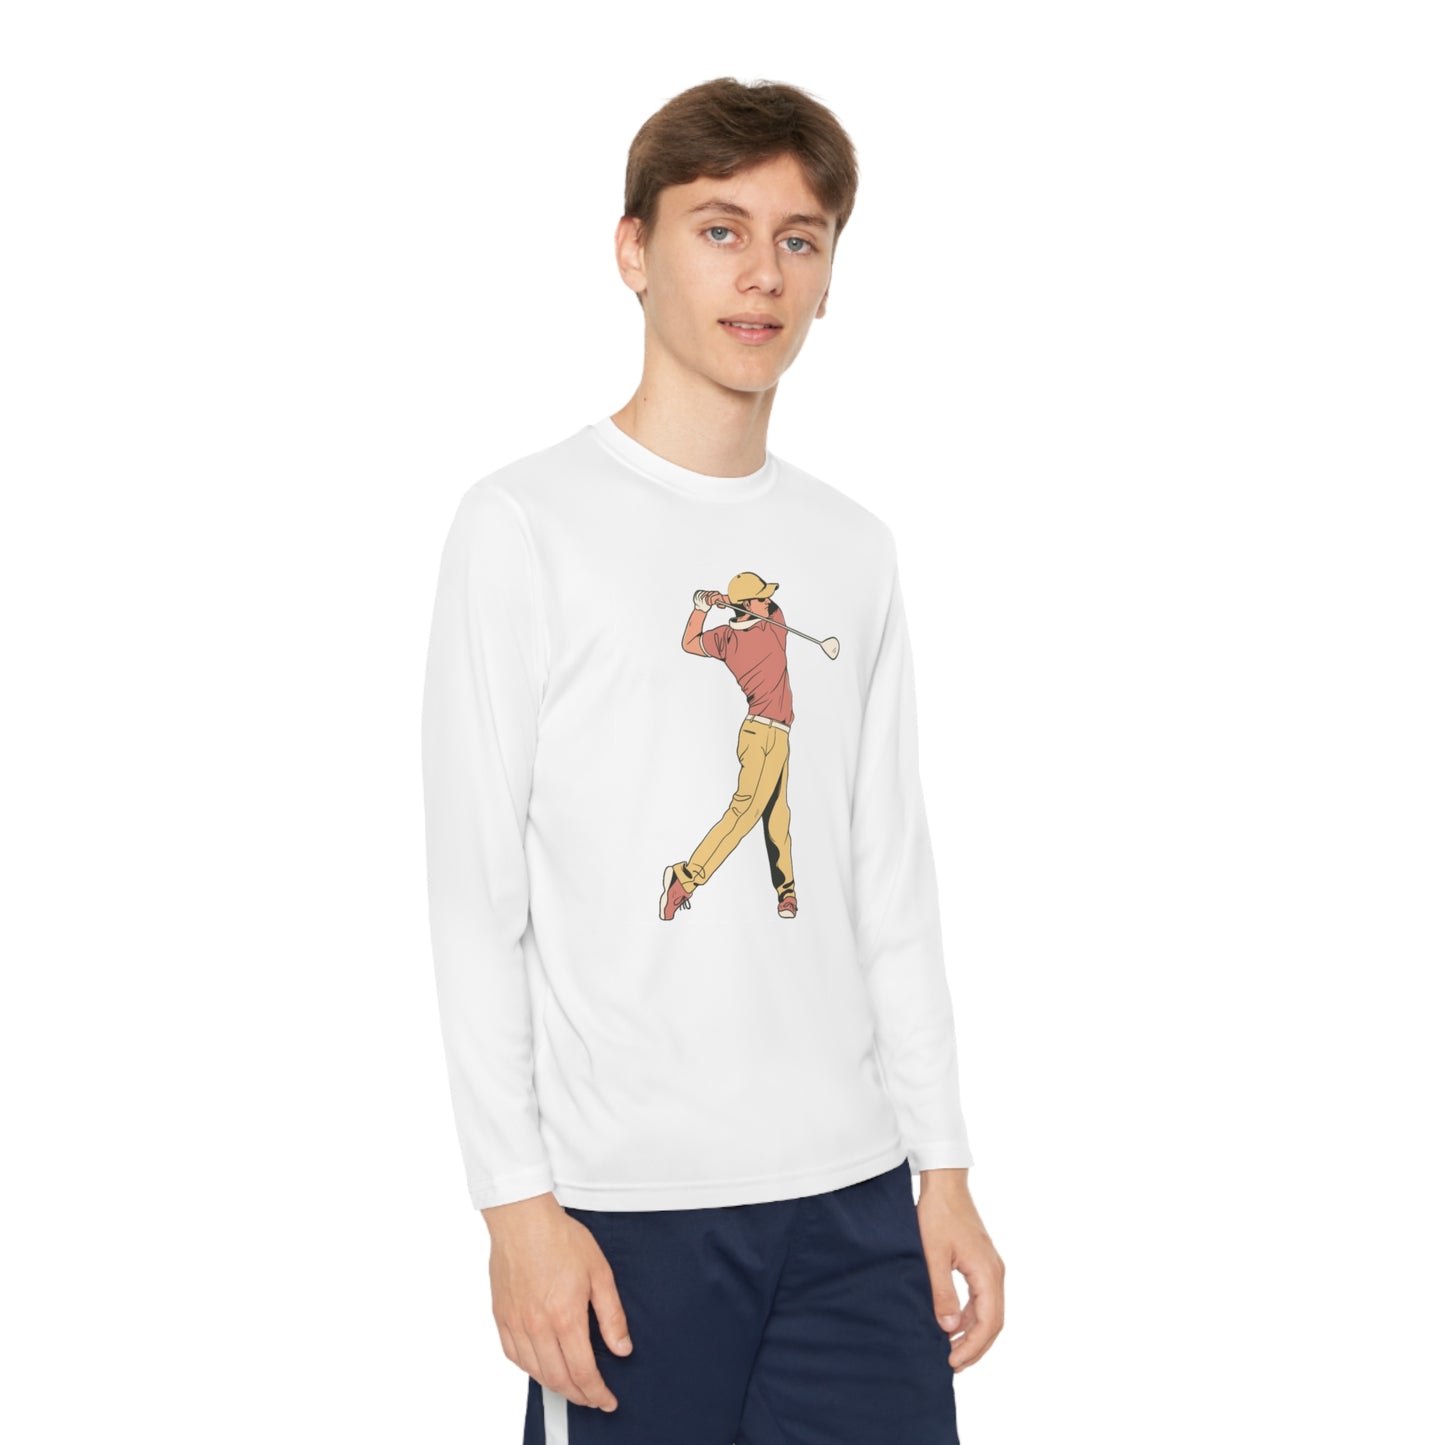 Youth Long Sleeve Competitor Tee: Golf